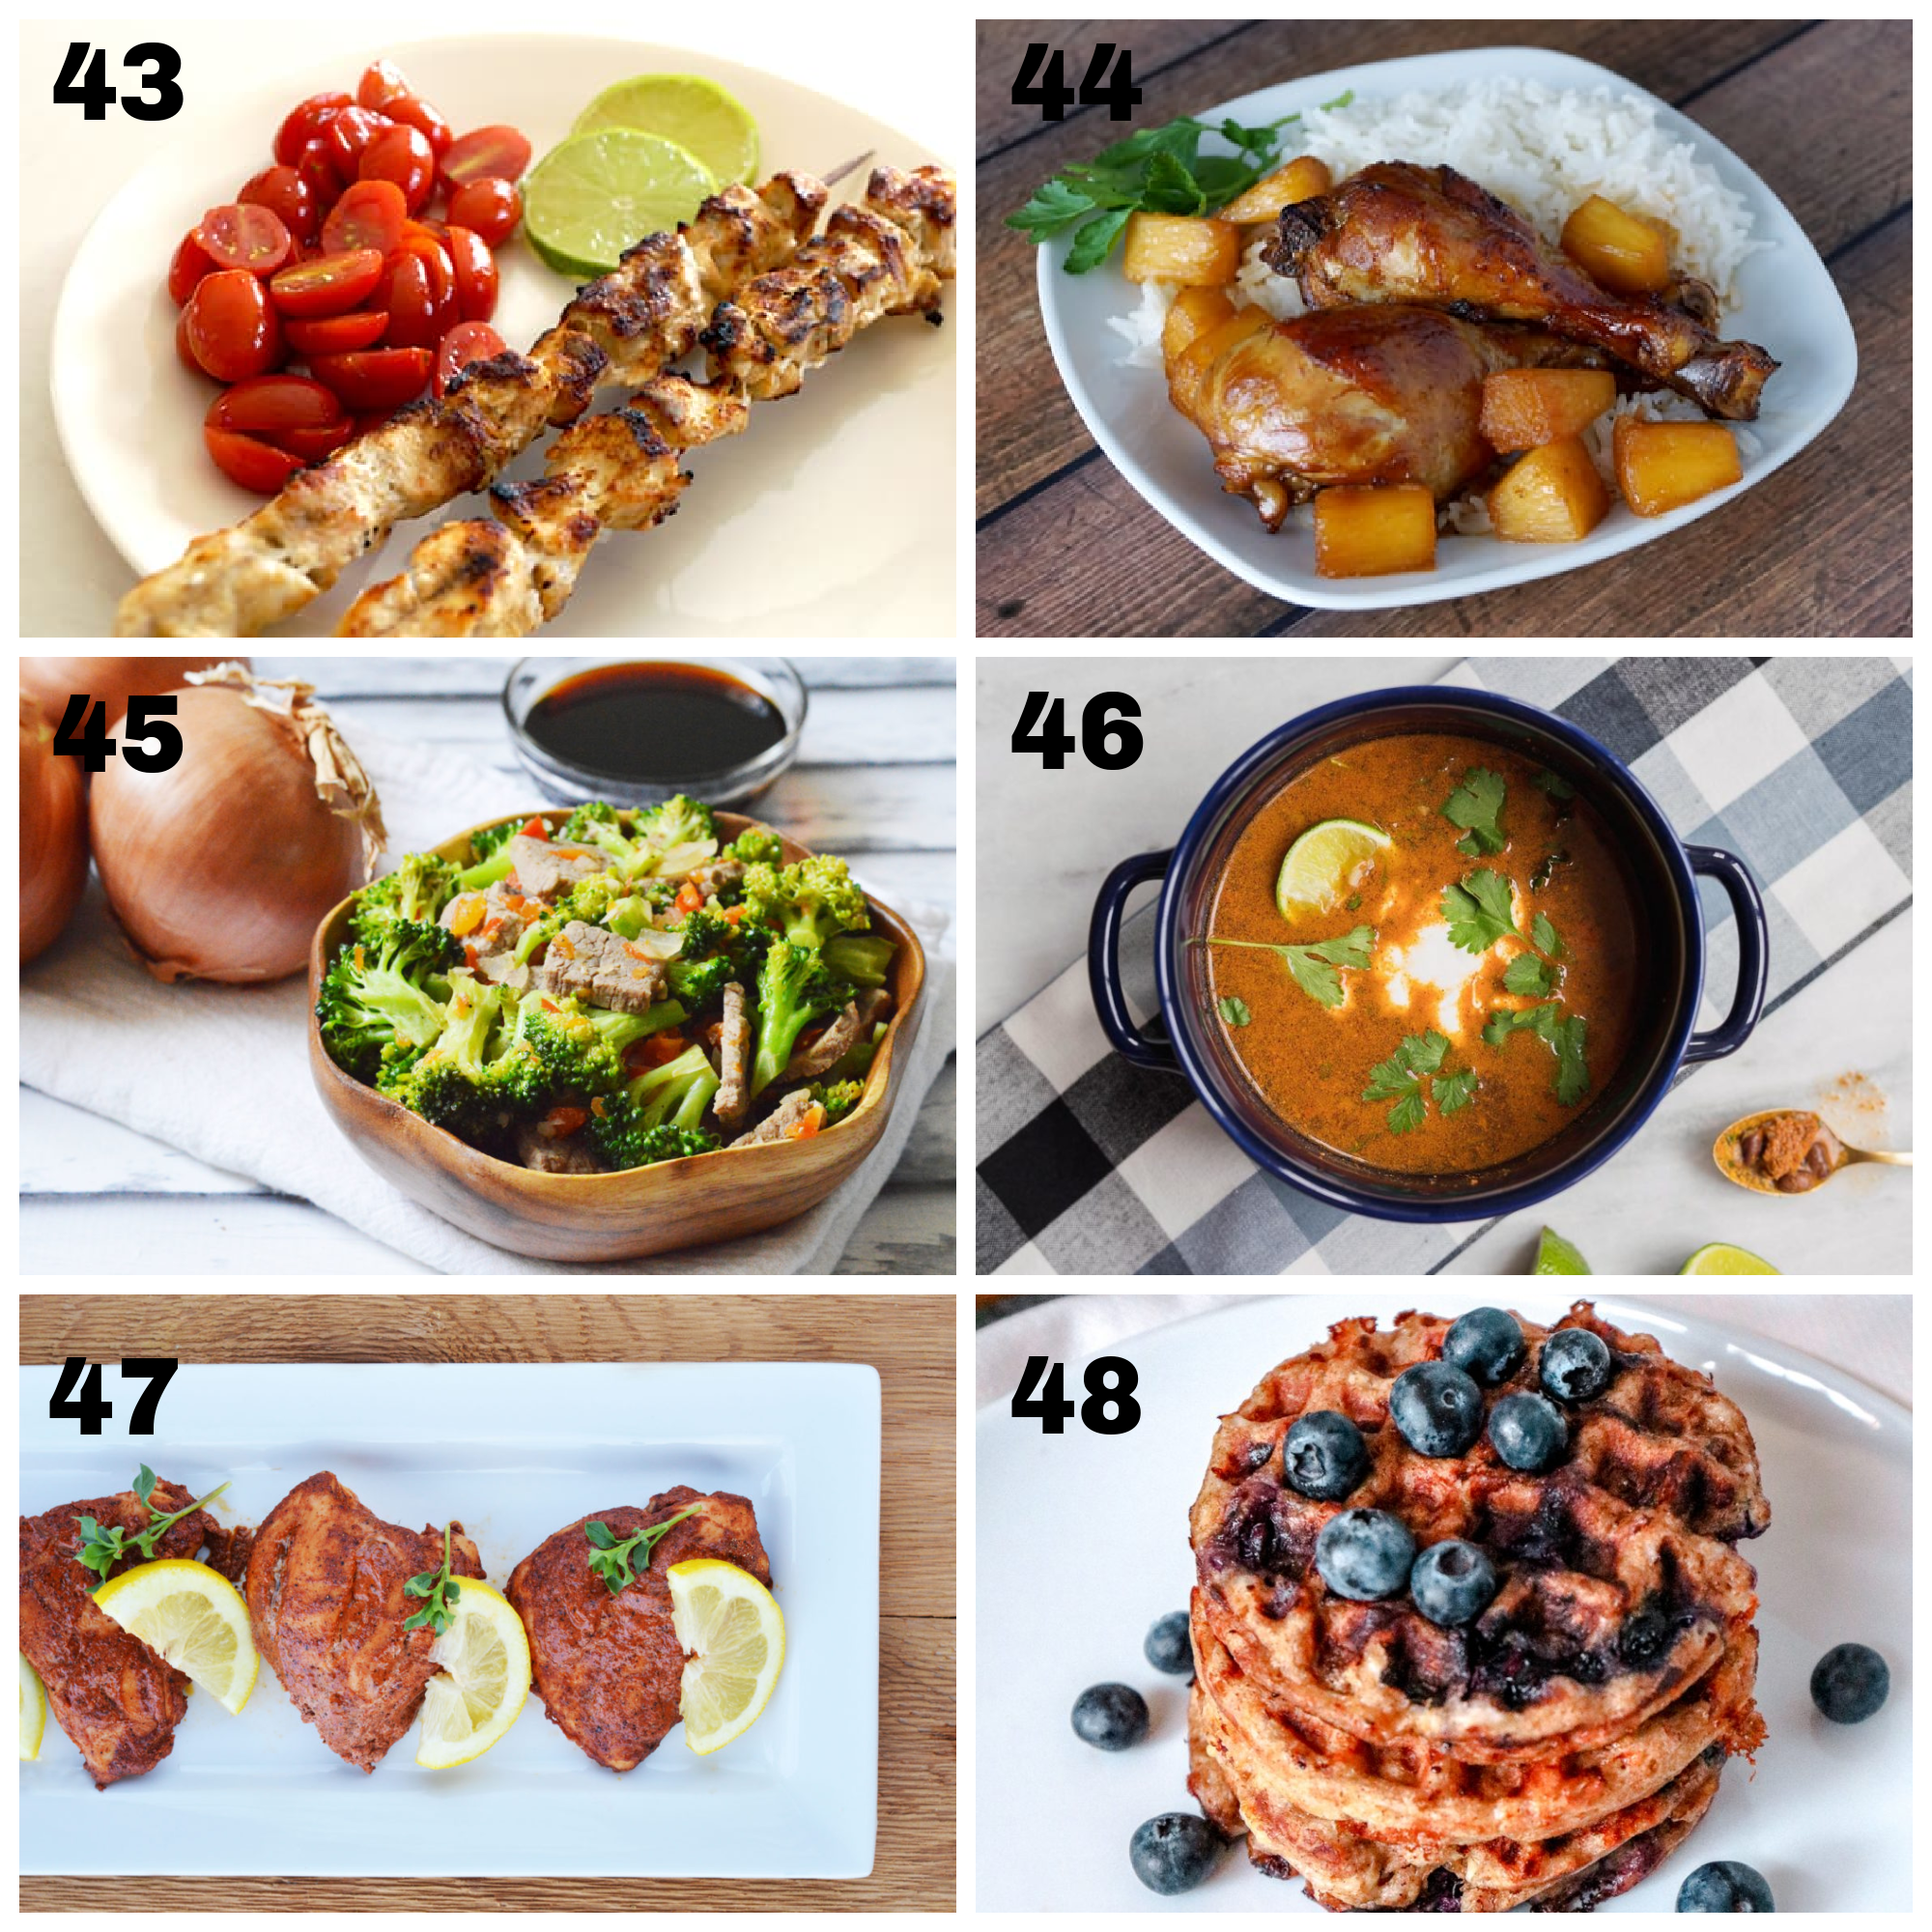 6 completed dinner ideas for low carb make ahead meals labeled 43-48